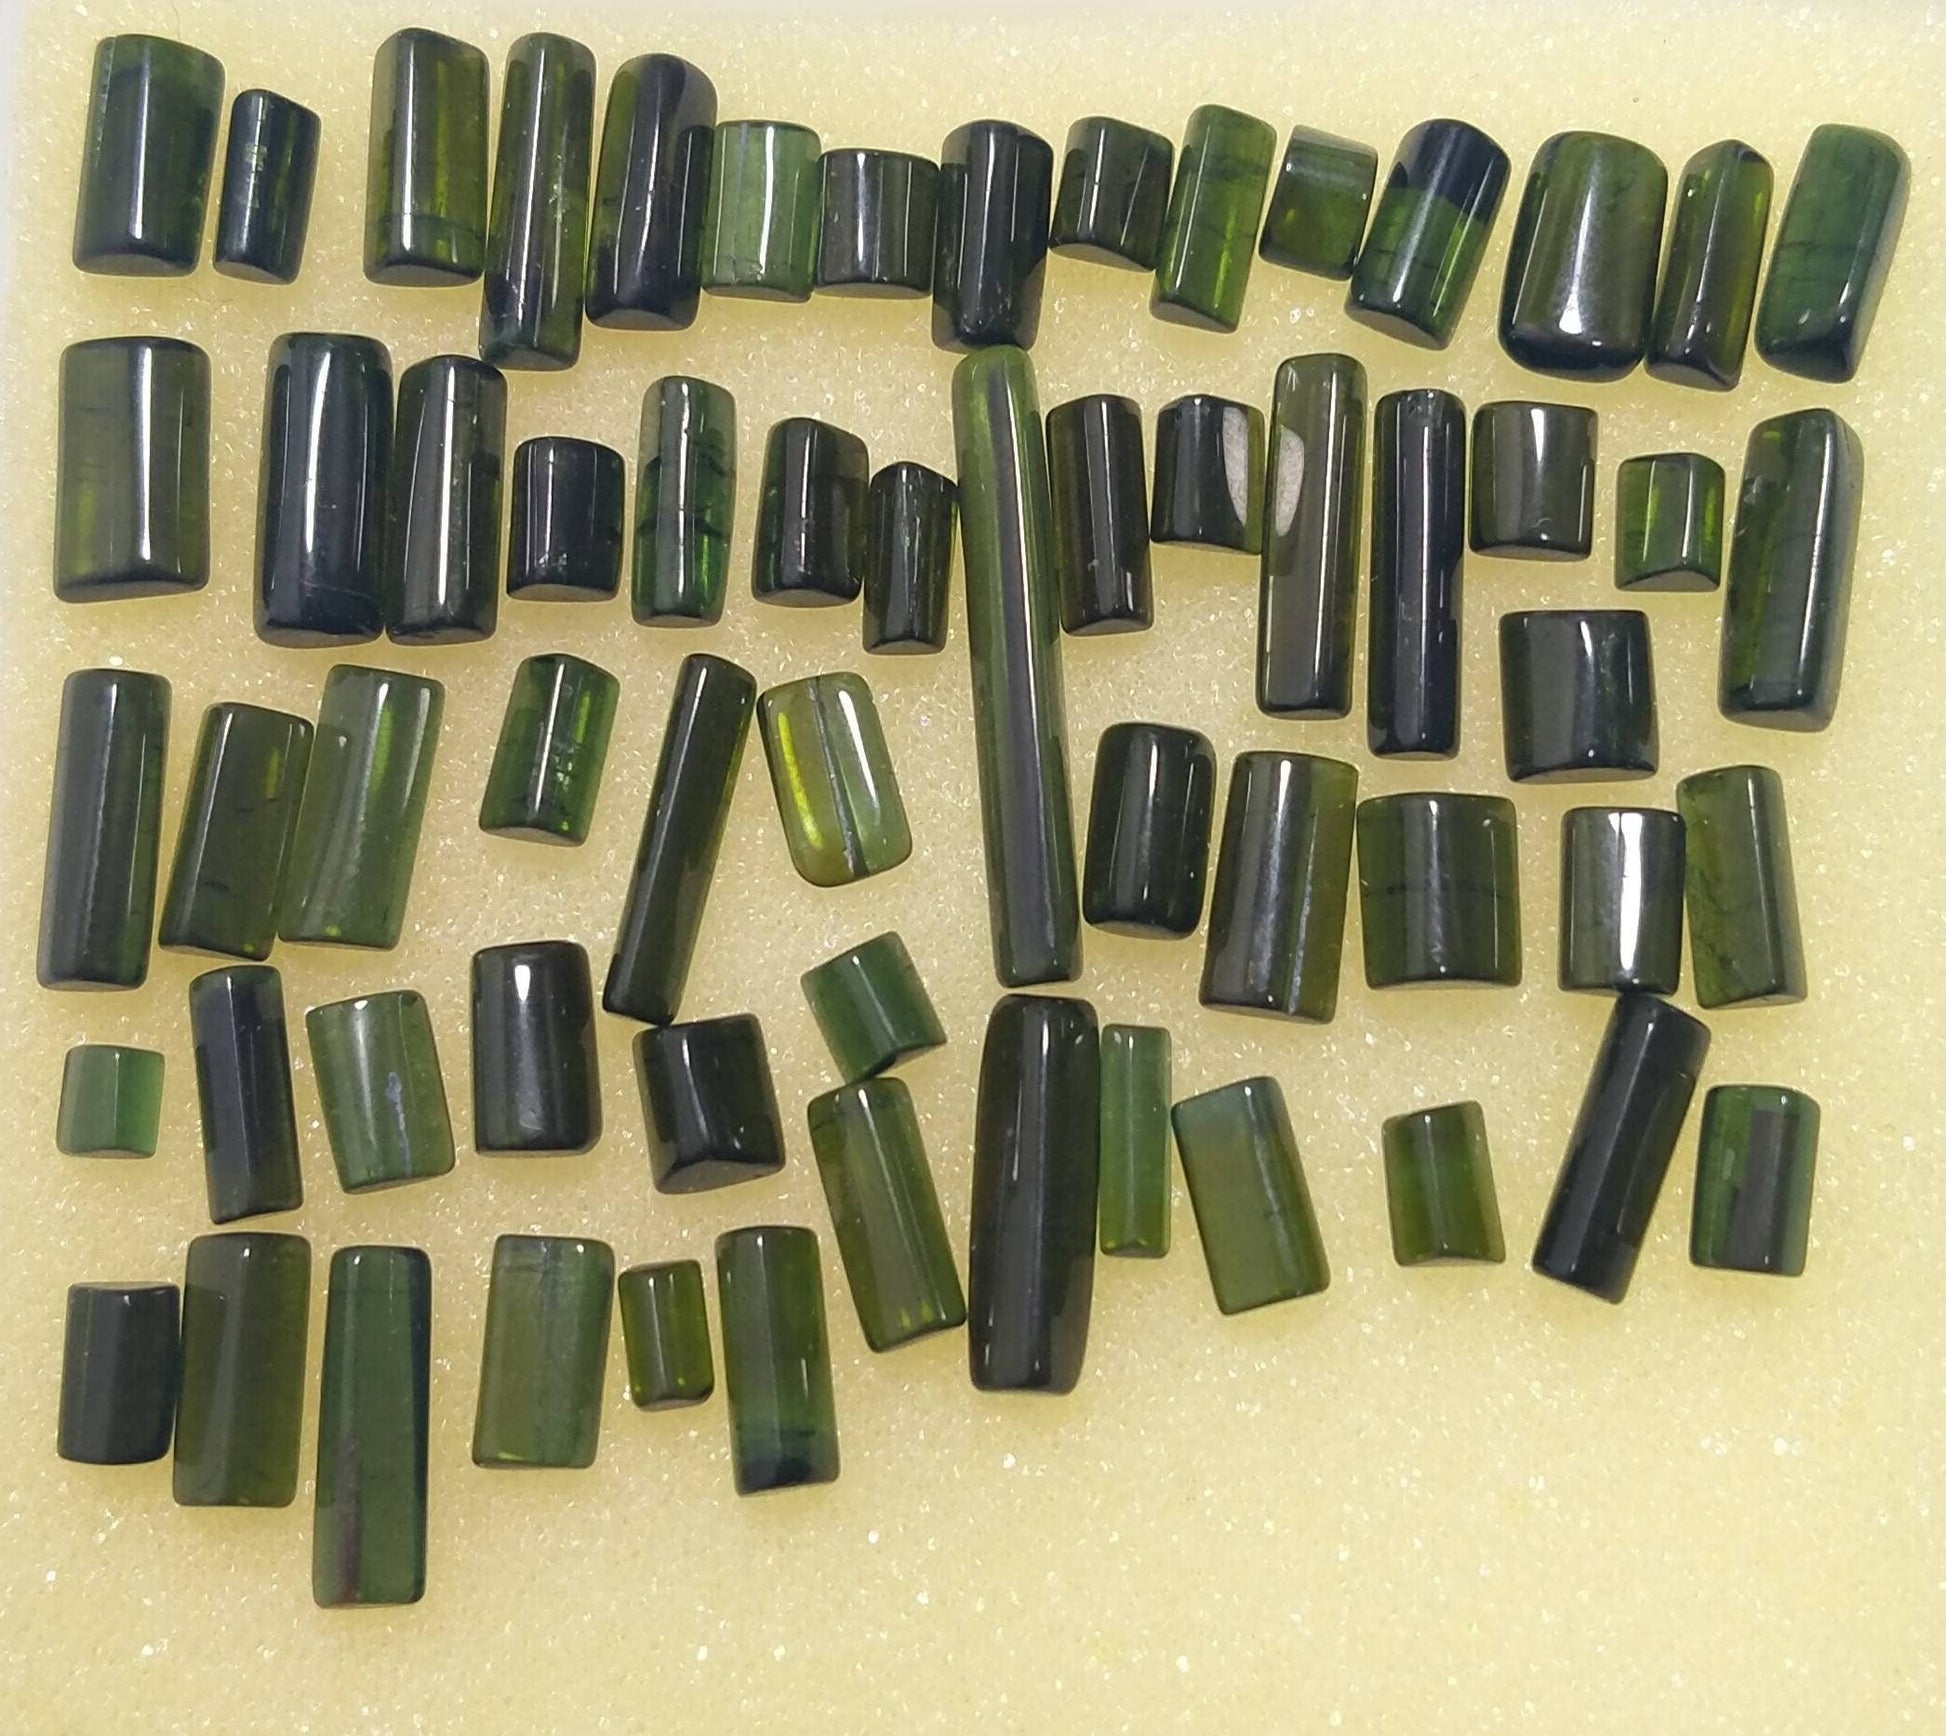 ARSAA GEMS AND MINERALSNatural fine quality beautiful 102 carats green Tourmaline cabochons lot - Premium  from ARSAA GEMS AND MINERALS - Just $200.00! Shop now at ARSAA GEMS AND MINERALS